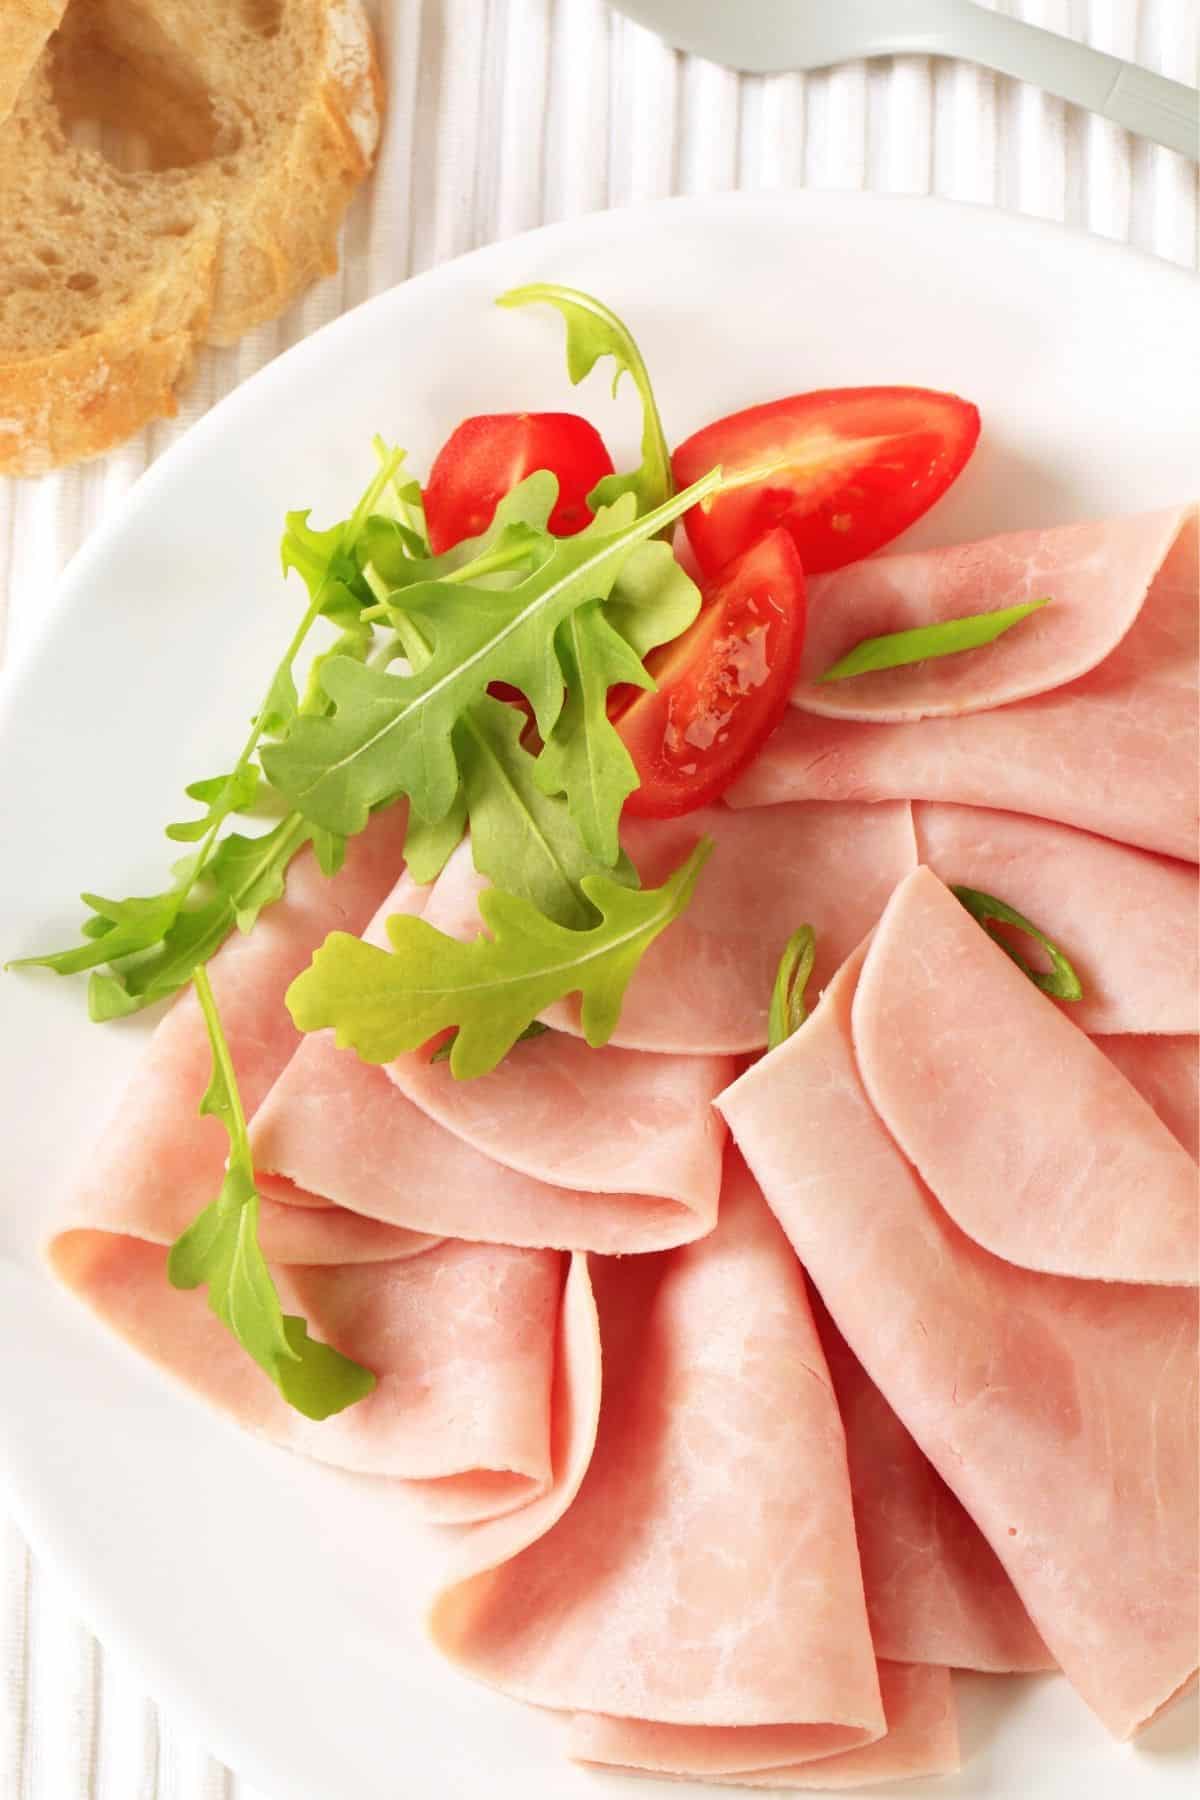 turkey slices on a plate